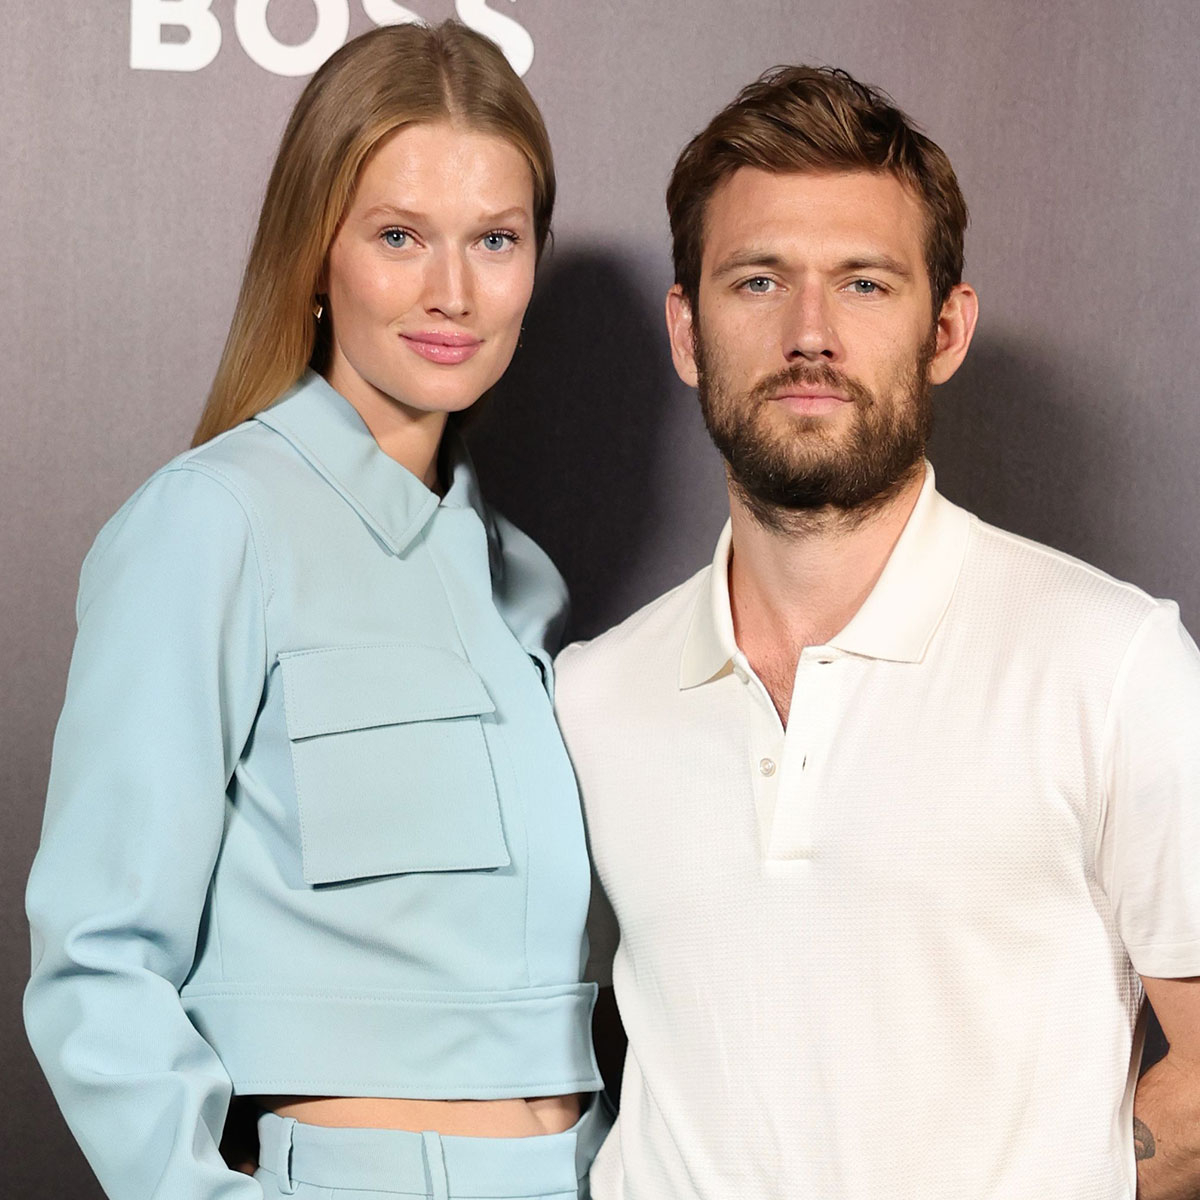 Alex Pettyfer’s Wife Toni Garrn Announces They Are Getting a Divorce